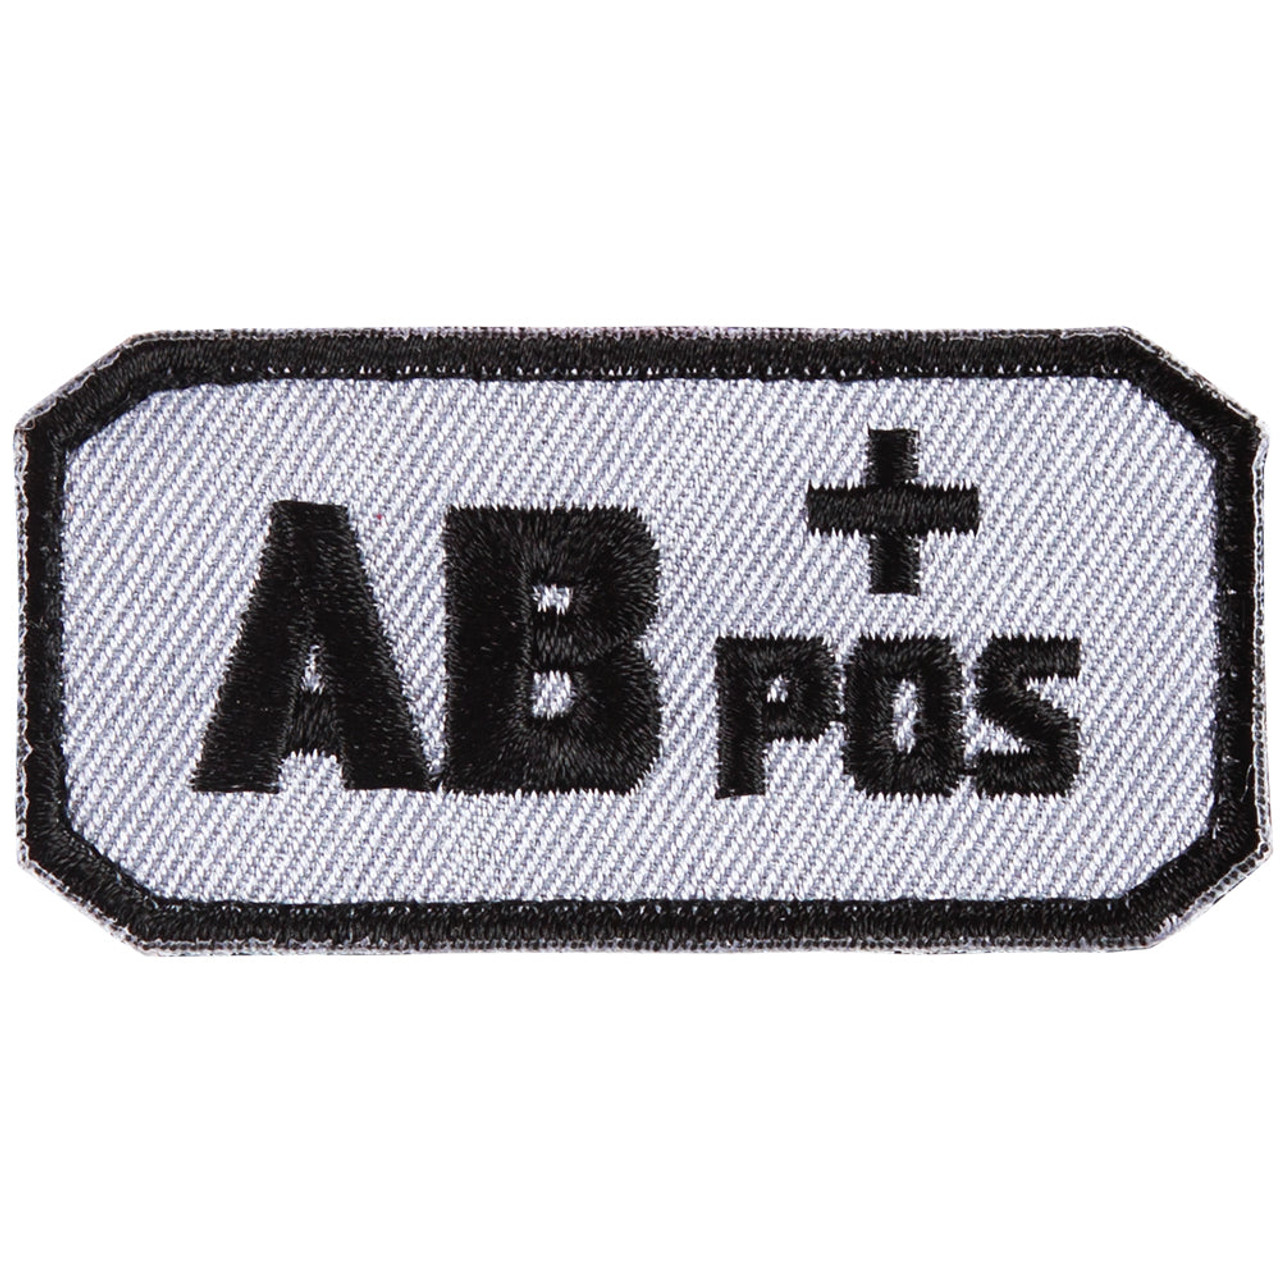 Blood Type Patches - Type A Positive - 2 x 1, Multitan